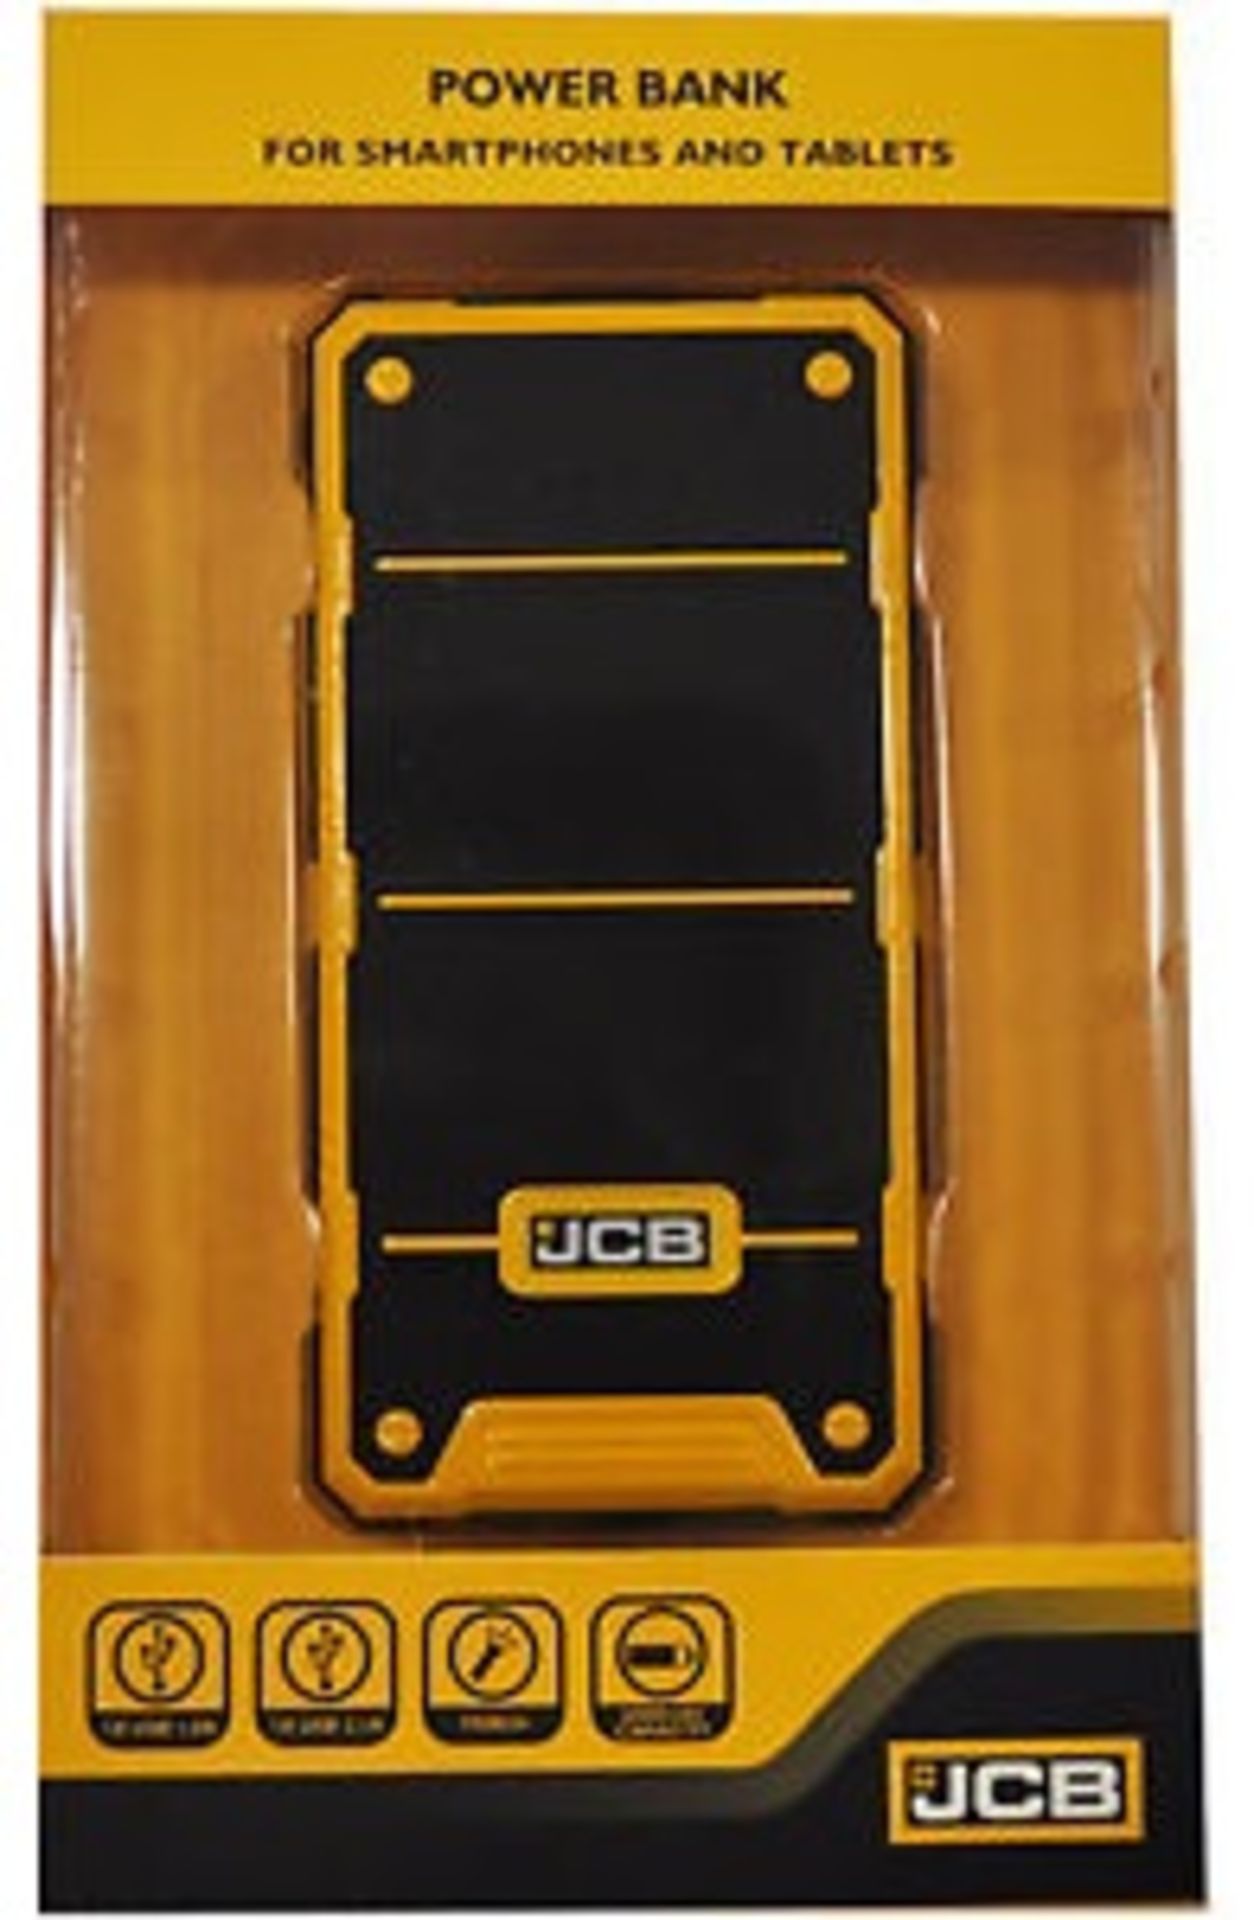 V Brand New JCB 6000mAh Power Bank with 2 x USB Ports (1 x 1.0A and 1 x 2.1A) Overcharge